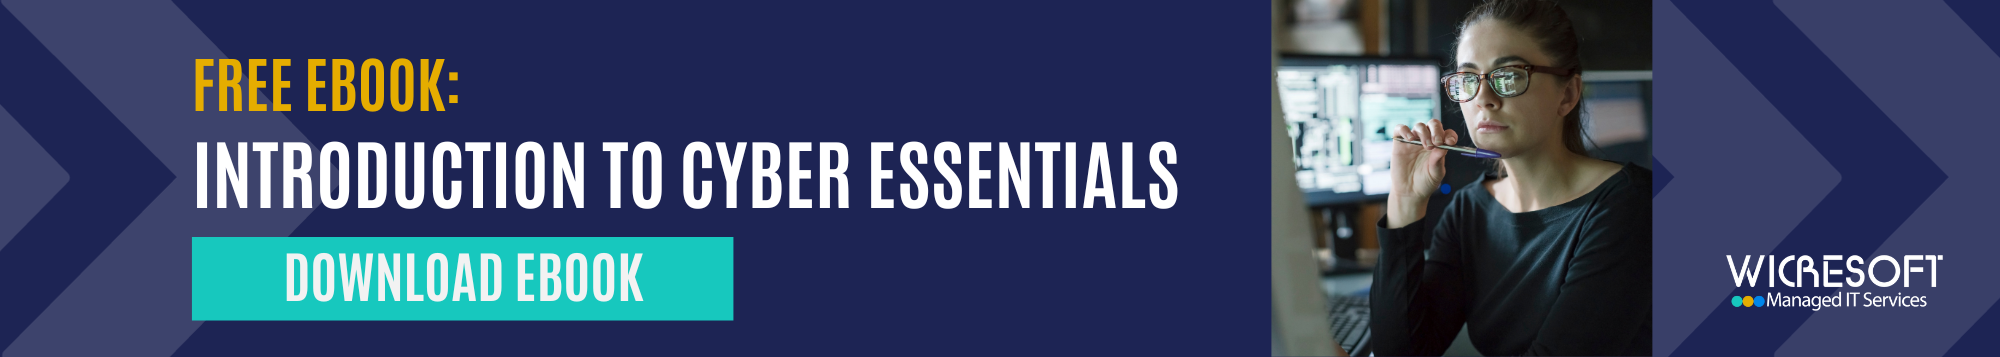 Free Ebook: Introduction to Cyber Essentials